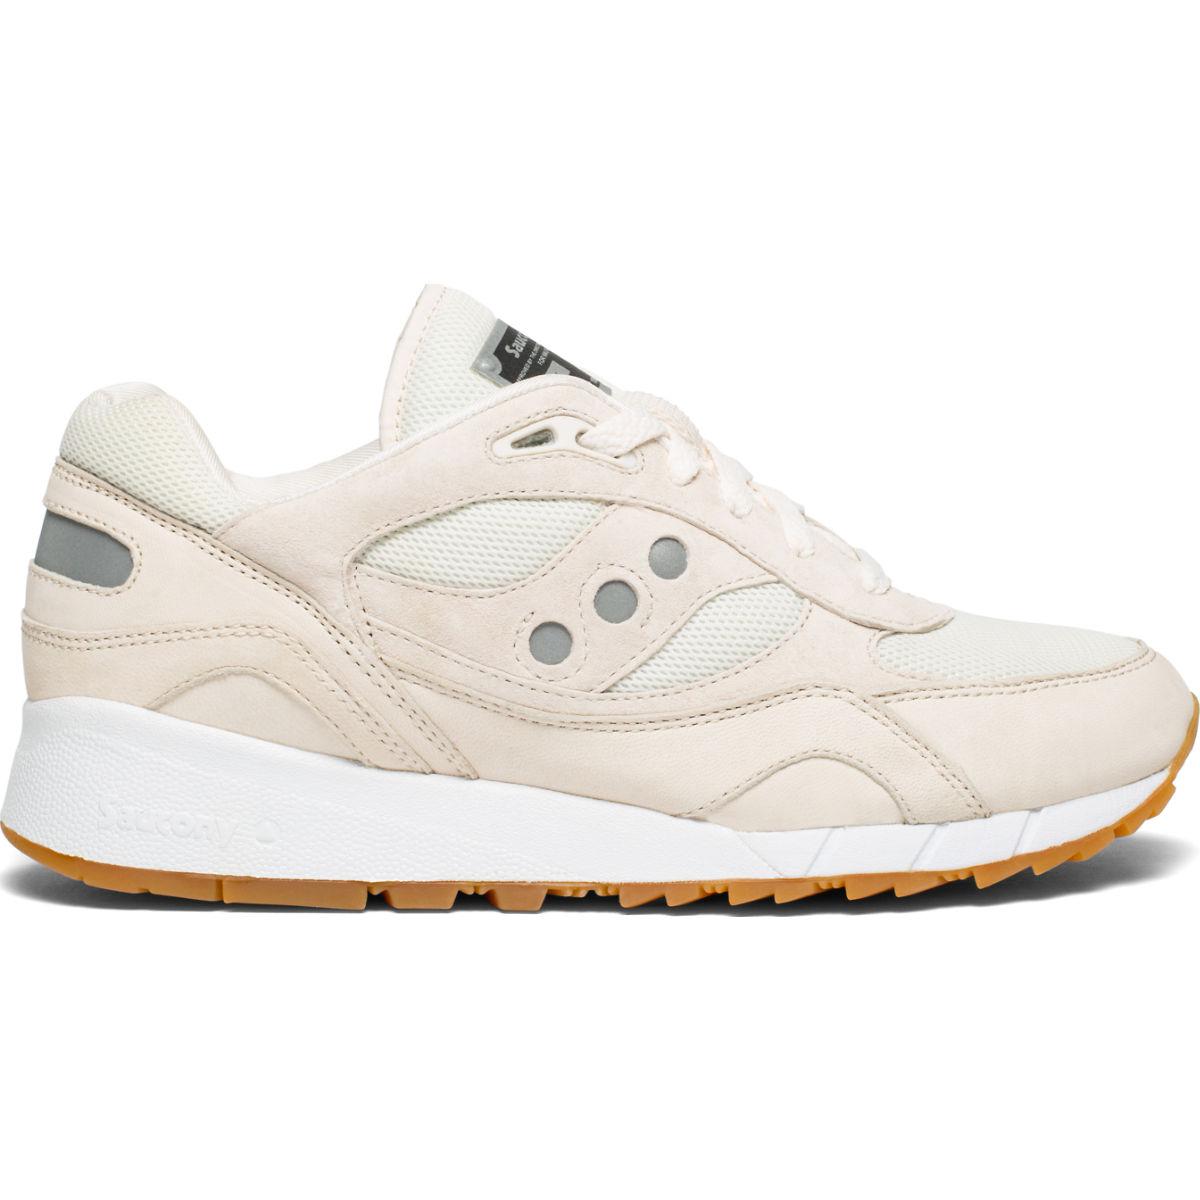 Saucony Suede Shadow 6000 Machine Pack in White for Men - Lyst